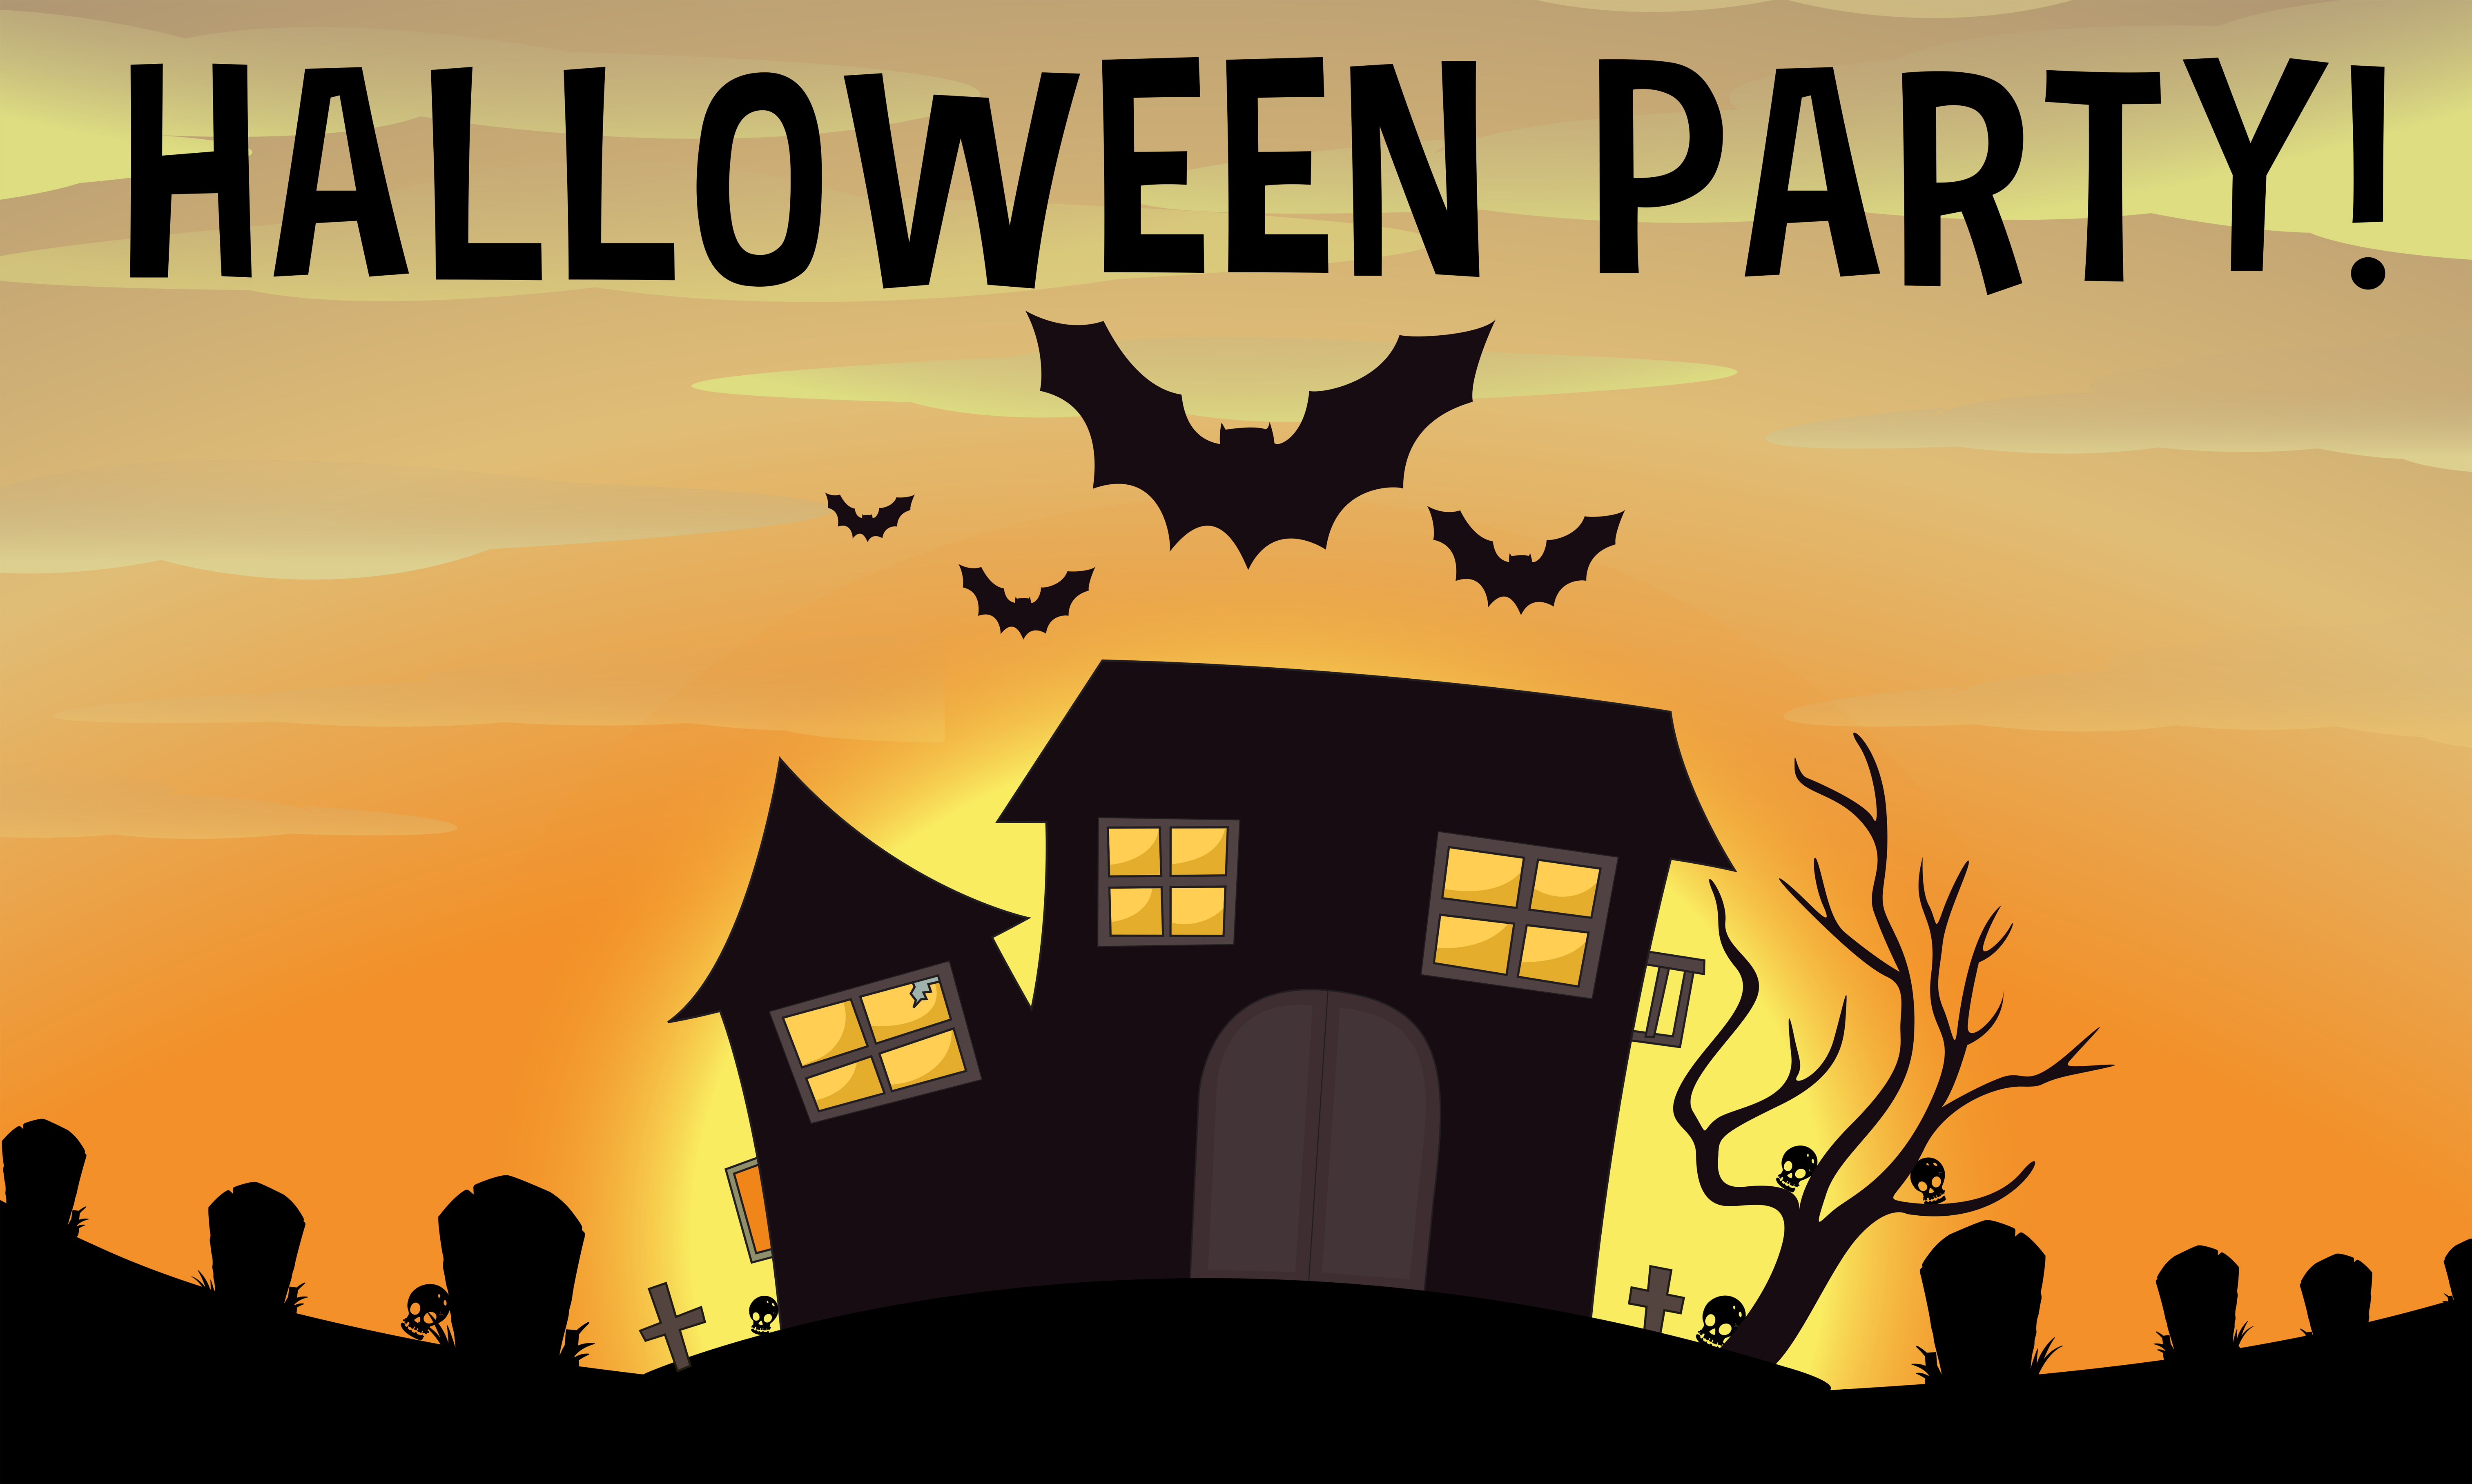 Poster of halloween party - Download Free Vectors, Clipart ...